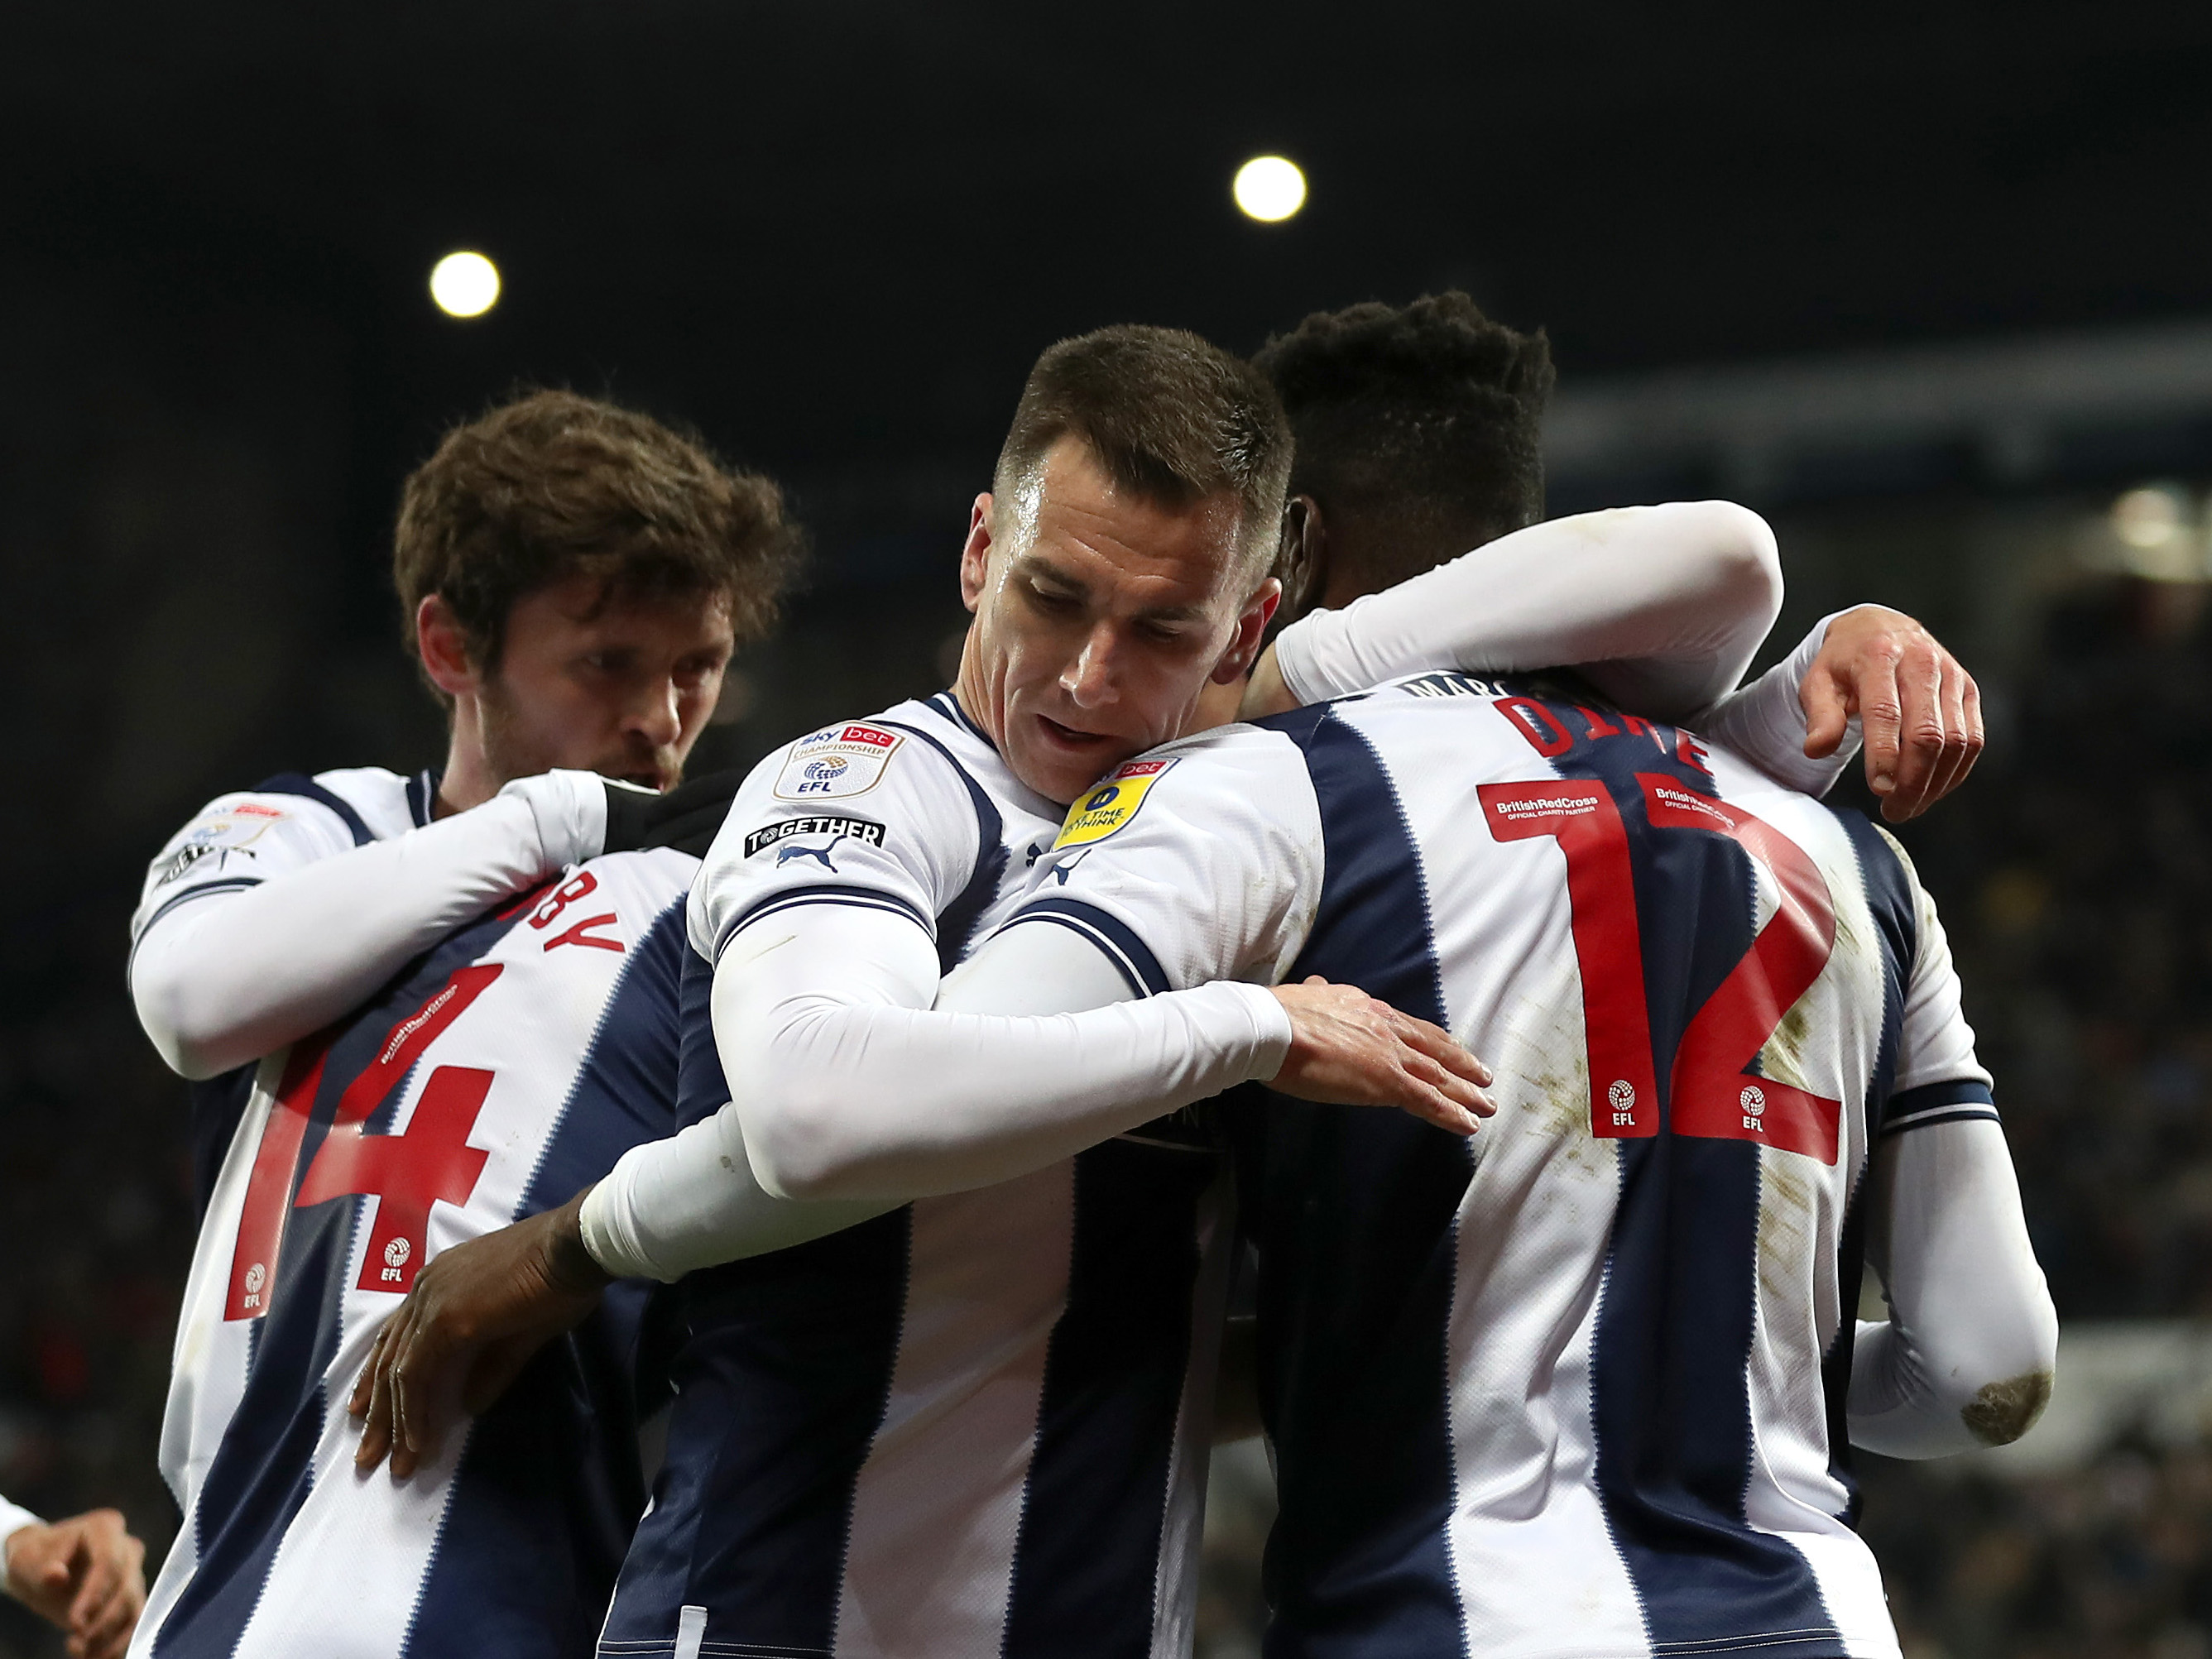 Albion players in a huddle after scoring a goal